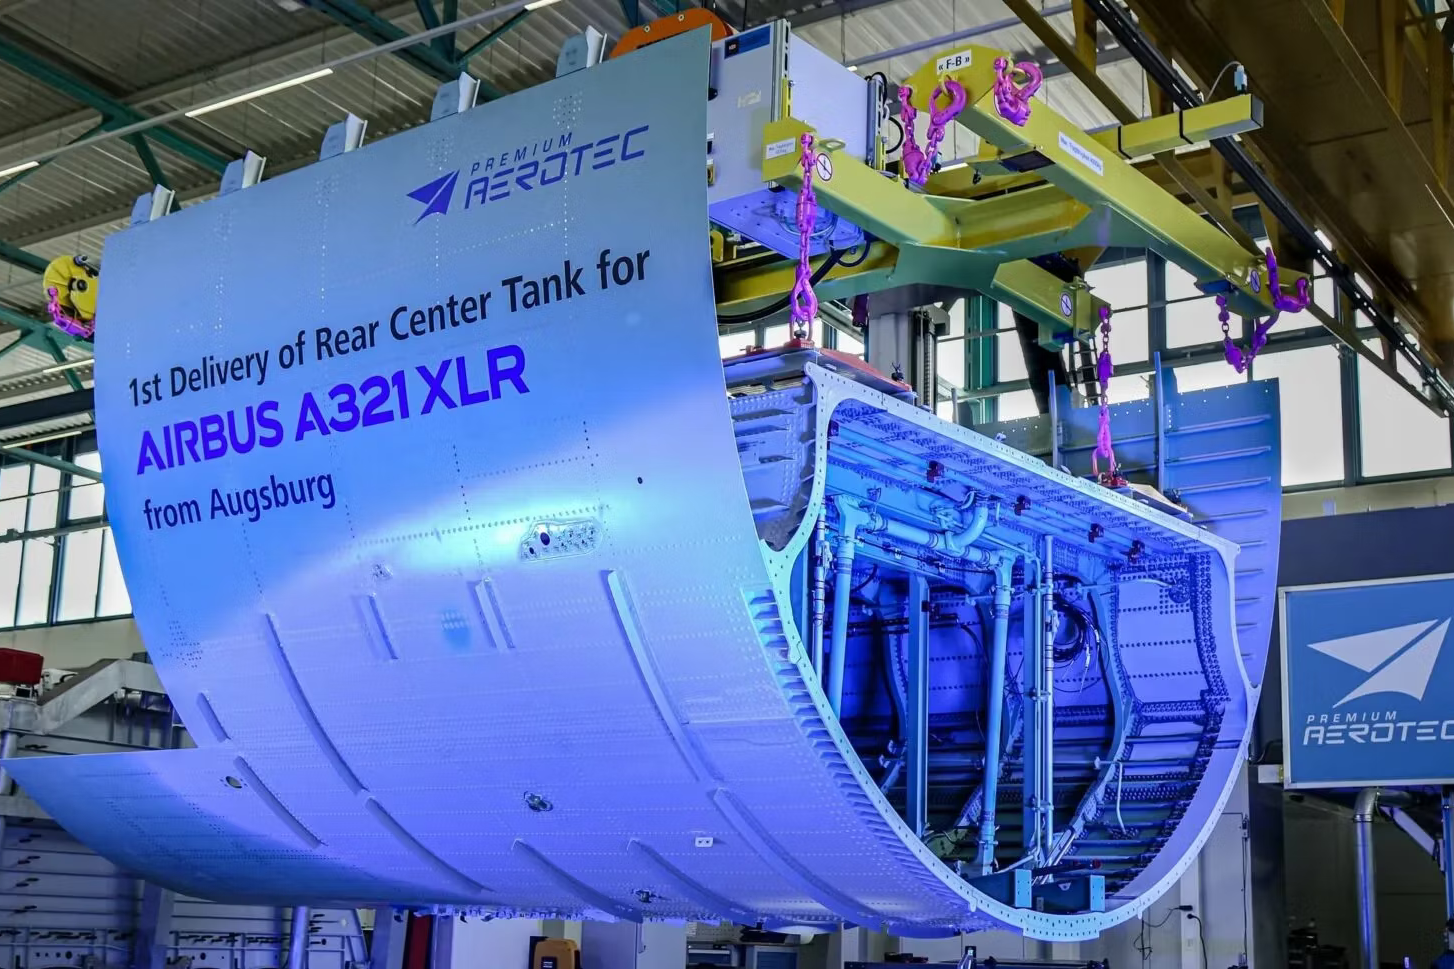 The rear center fuel tank of an Airbus A321XLR being lifted by a machine.